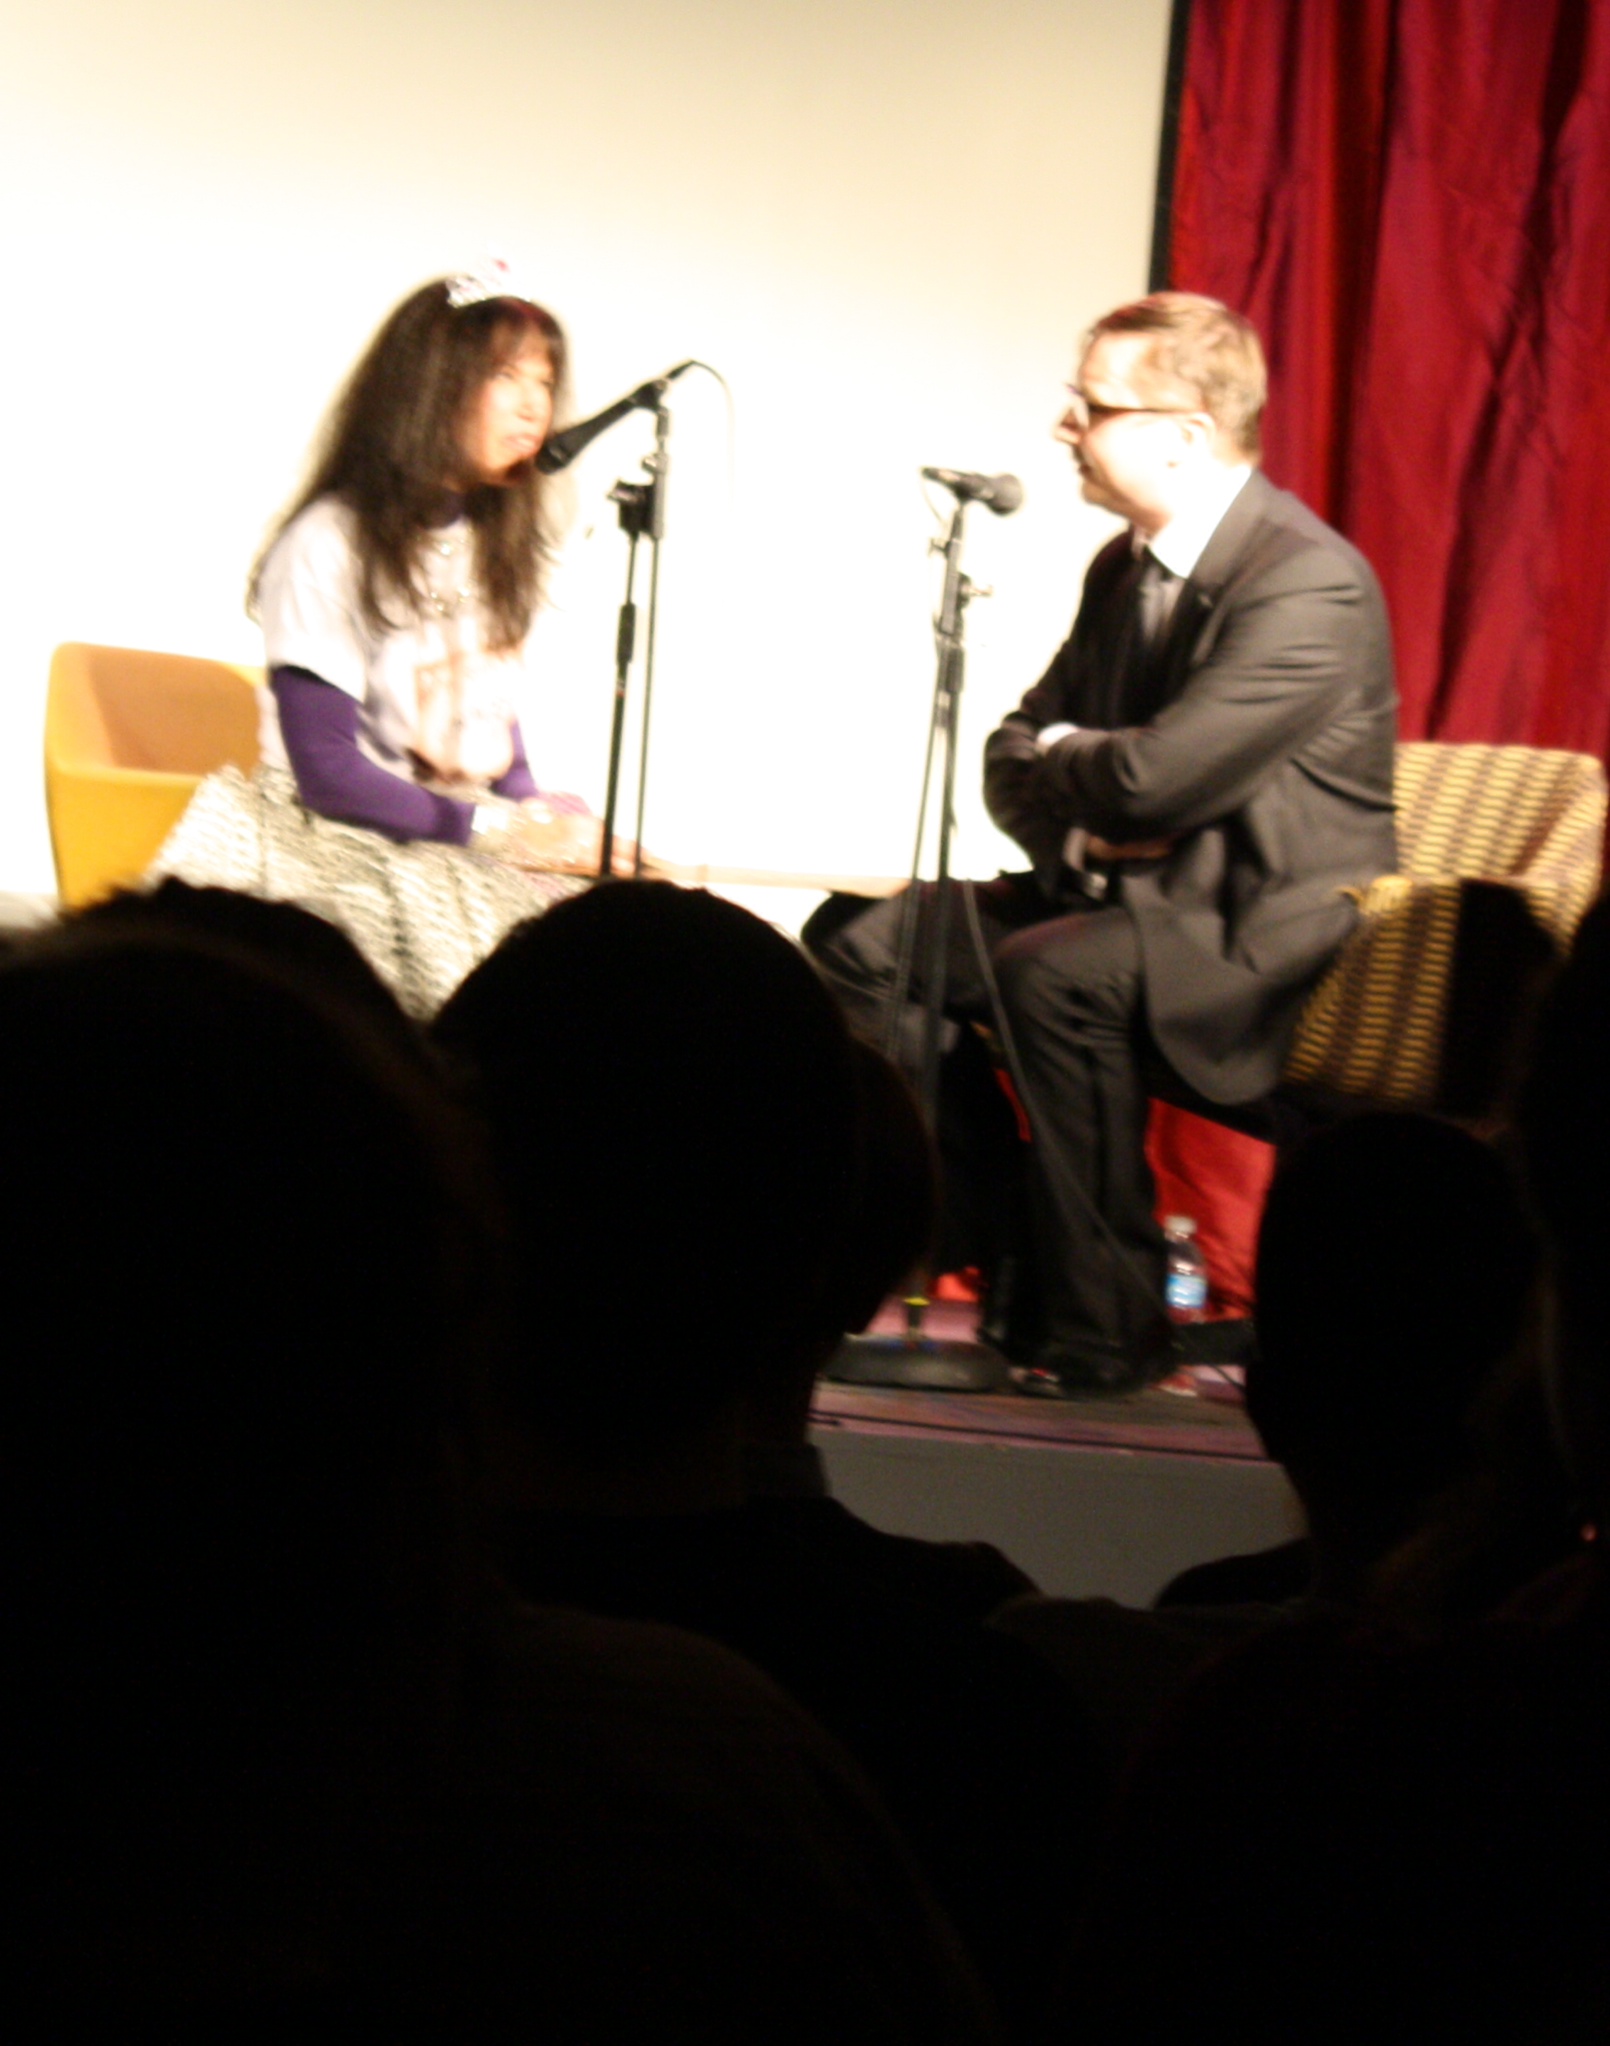 Renee Philly Fishman as Ouija Princess with John Hodgman in stand up comedy routine. See my trivia for more!